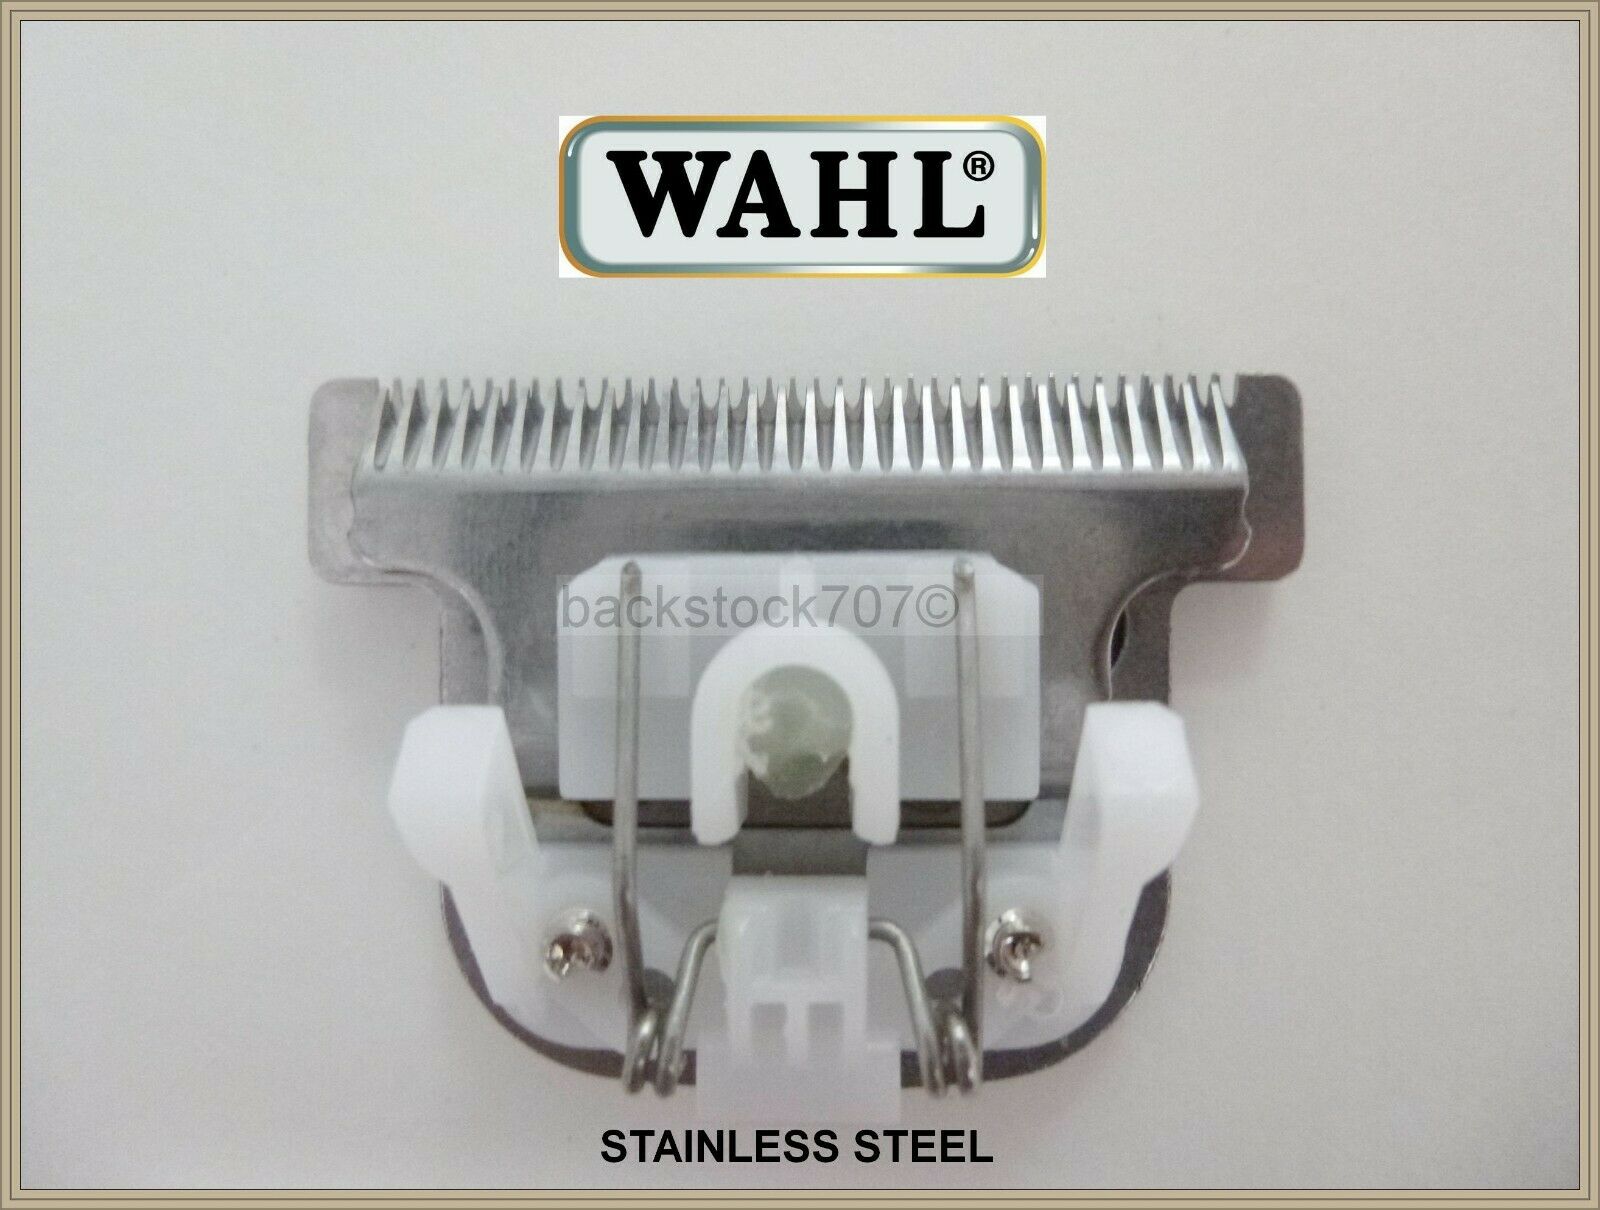 Genuine Wahl Oem Replacement T Blade Lithium Ion Trimmer 02144 9818l